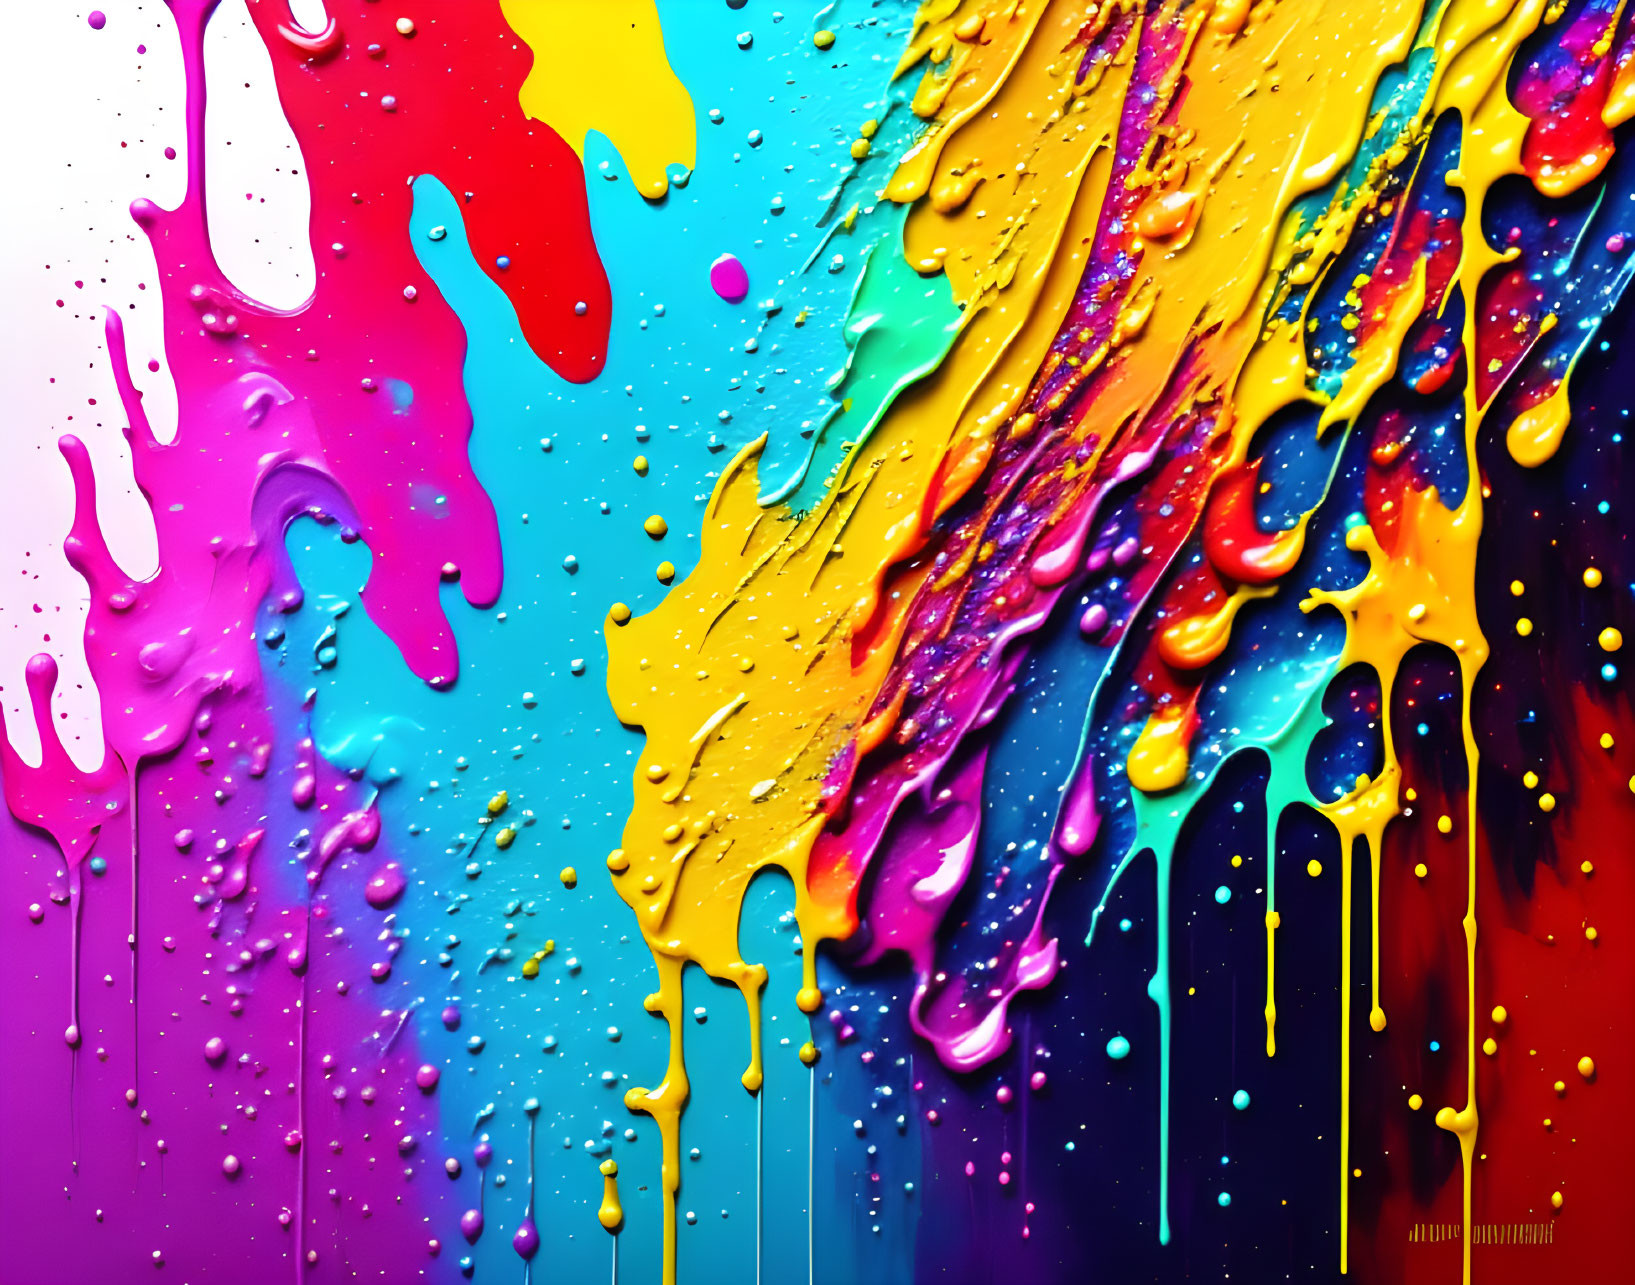 Colorful Paint Drips and Splatters on Glass Surface: Abstract and Dynamic Composition